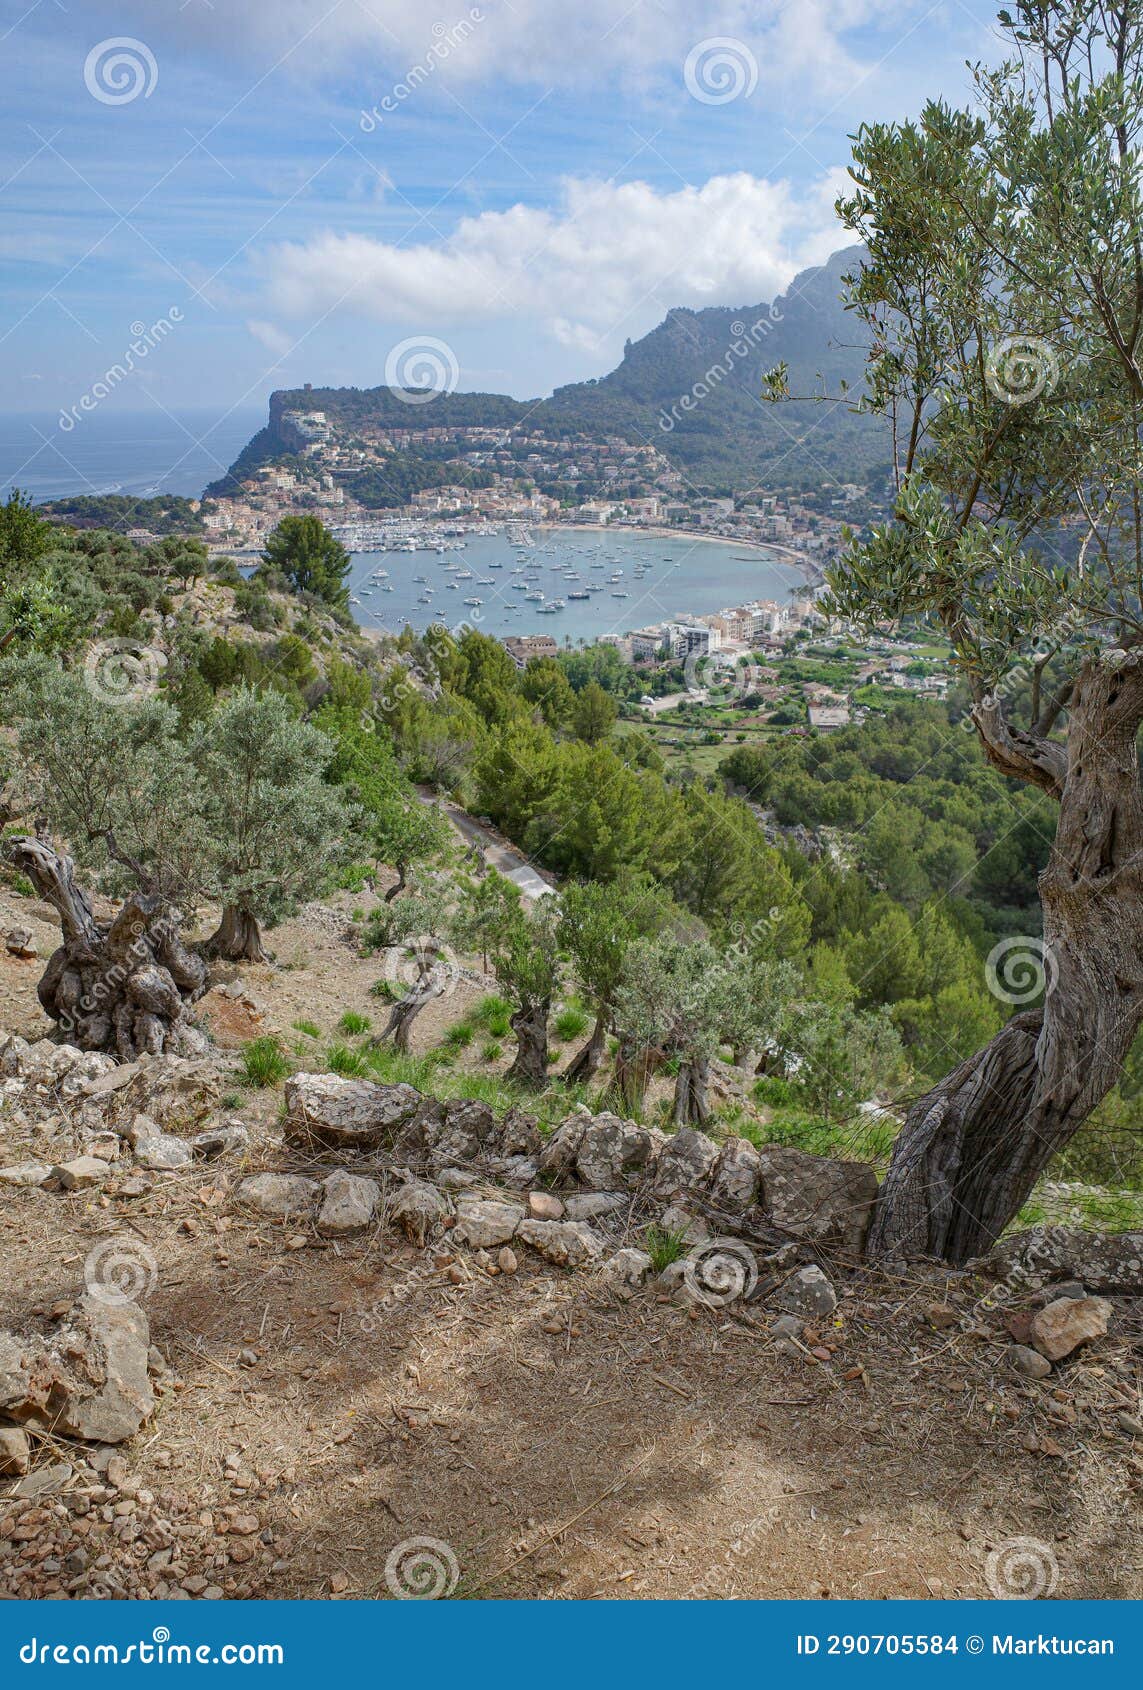 mallorca, spain - 12 june, 2023: views of port de soller from the gr221 hiking trail and the tramuntana mountains, mallorca